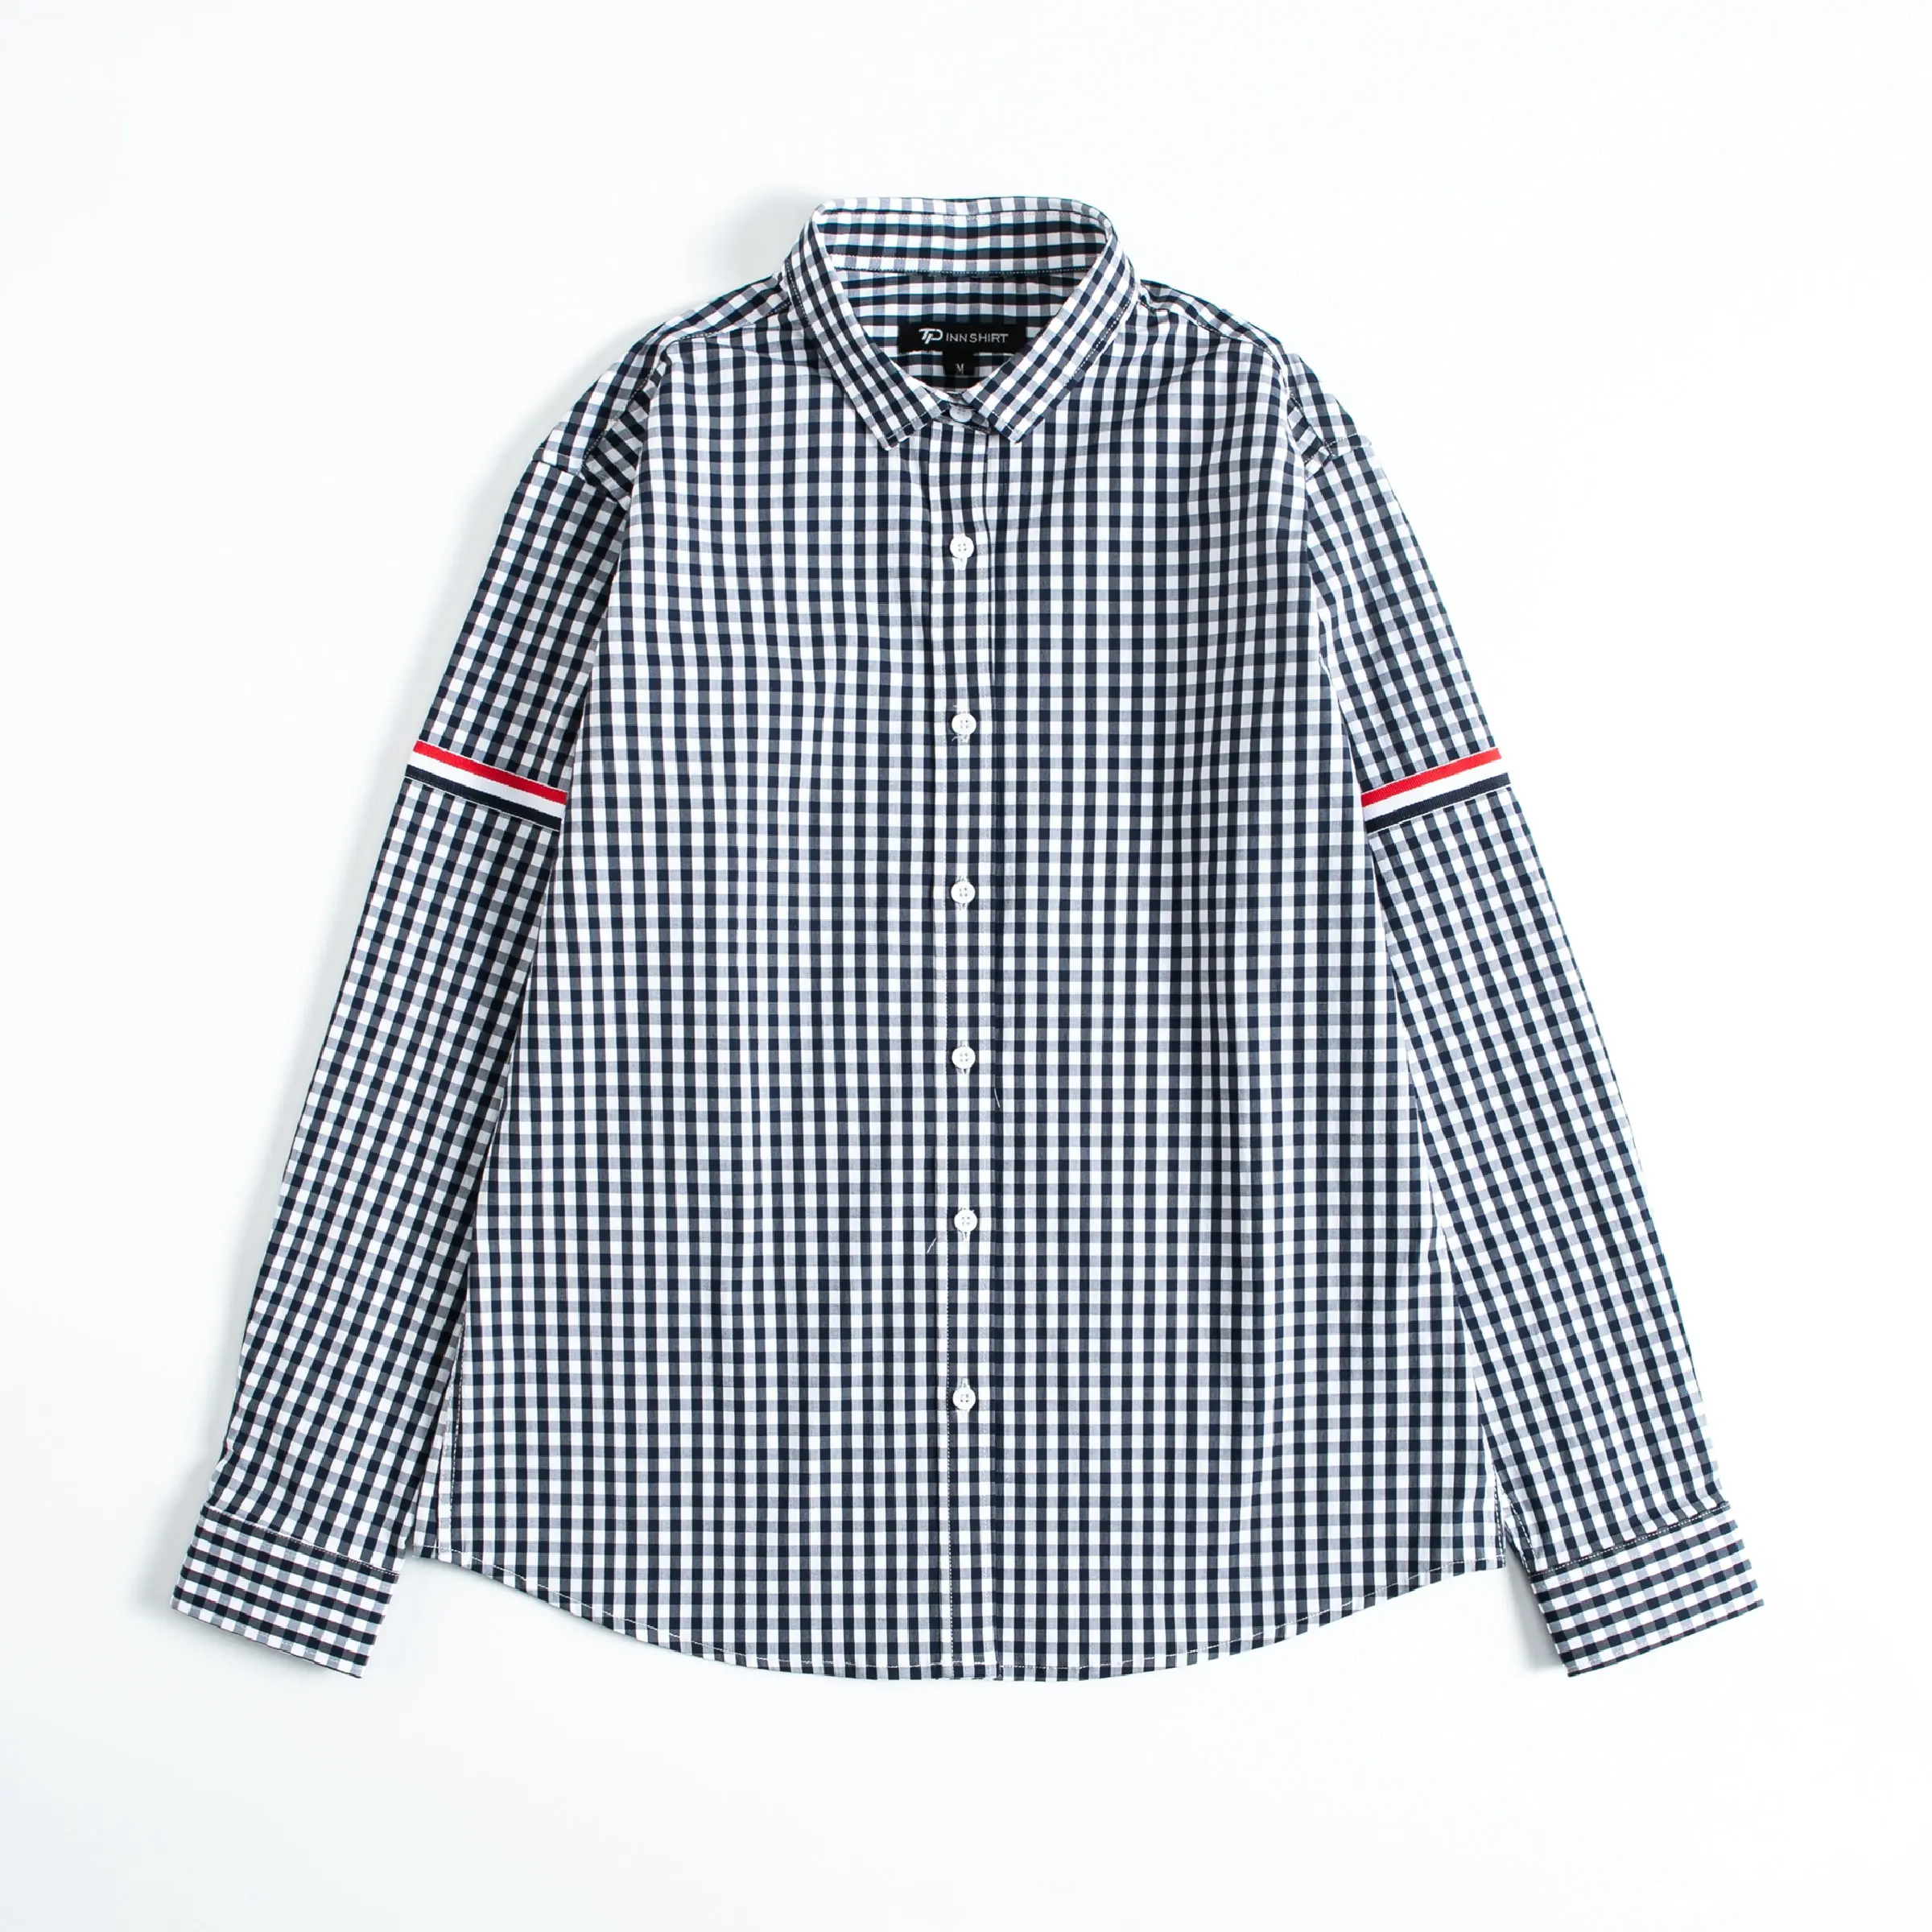 Navy blue plaid tb wind shirt unisex girl small size elastic Chaoyang casual bf wind shirt